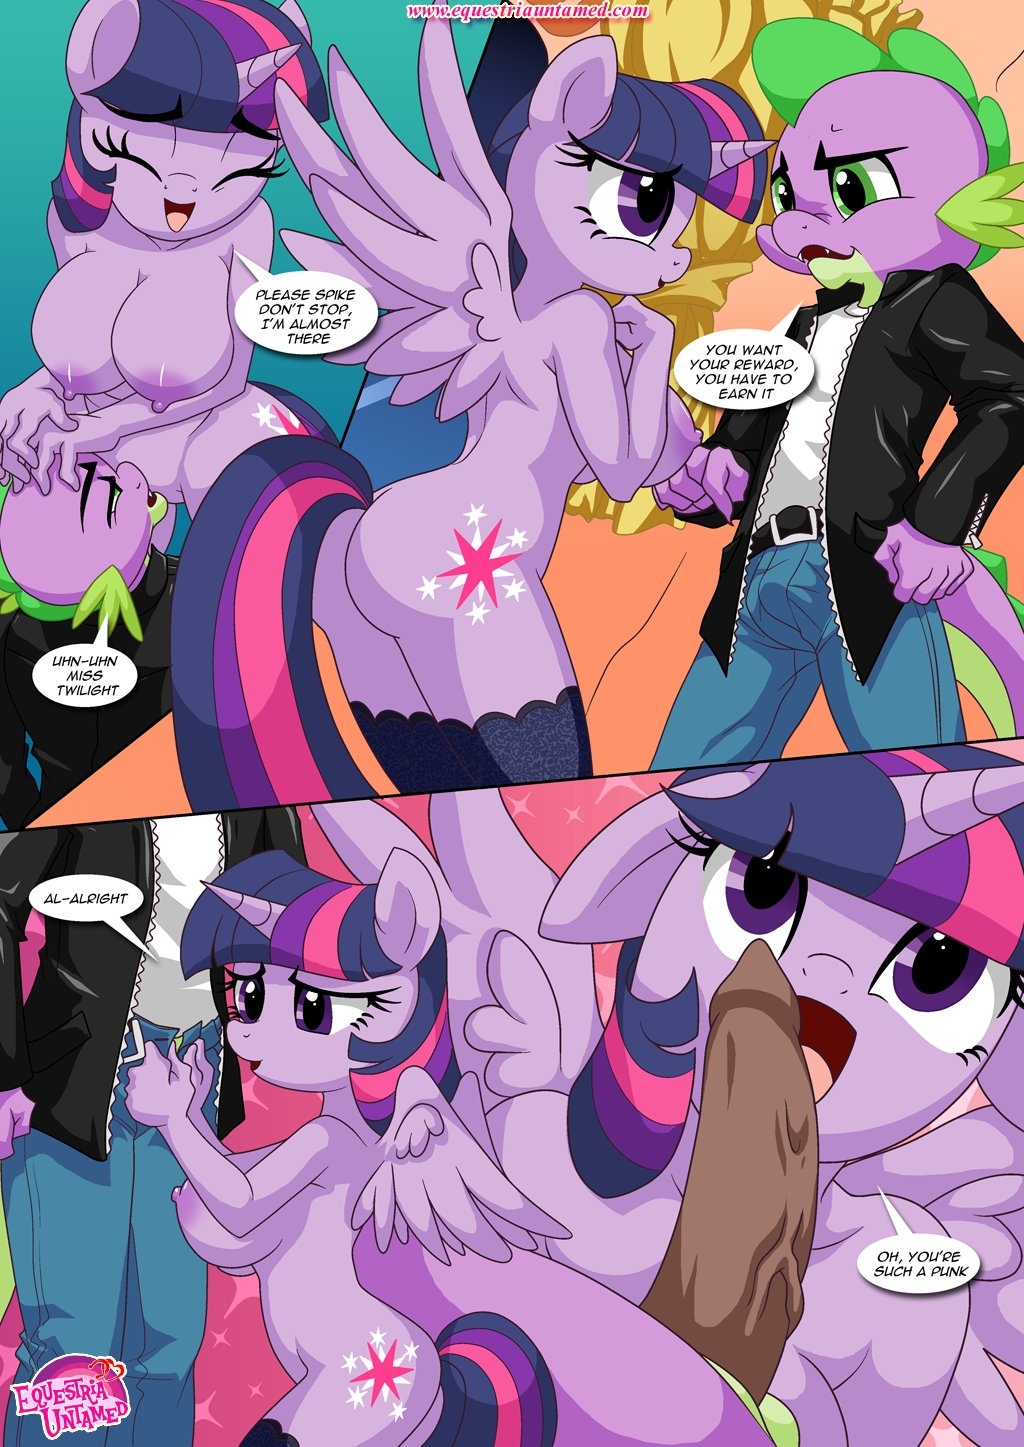 [Palcomix] Sex Ed with Miss Twilight Sparkle (My Little Pony Friendship is Magic) 23